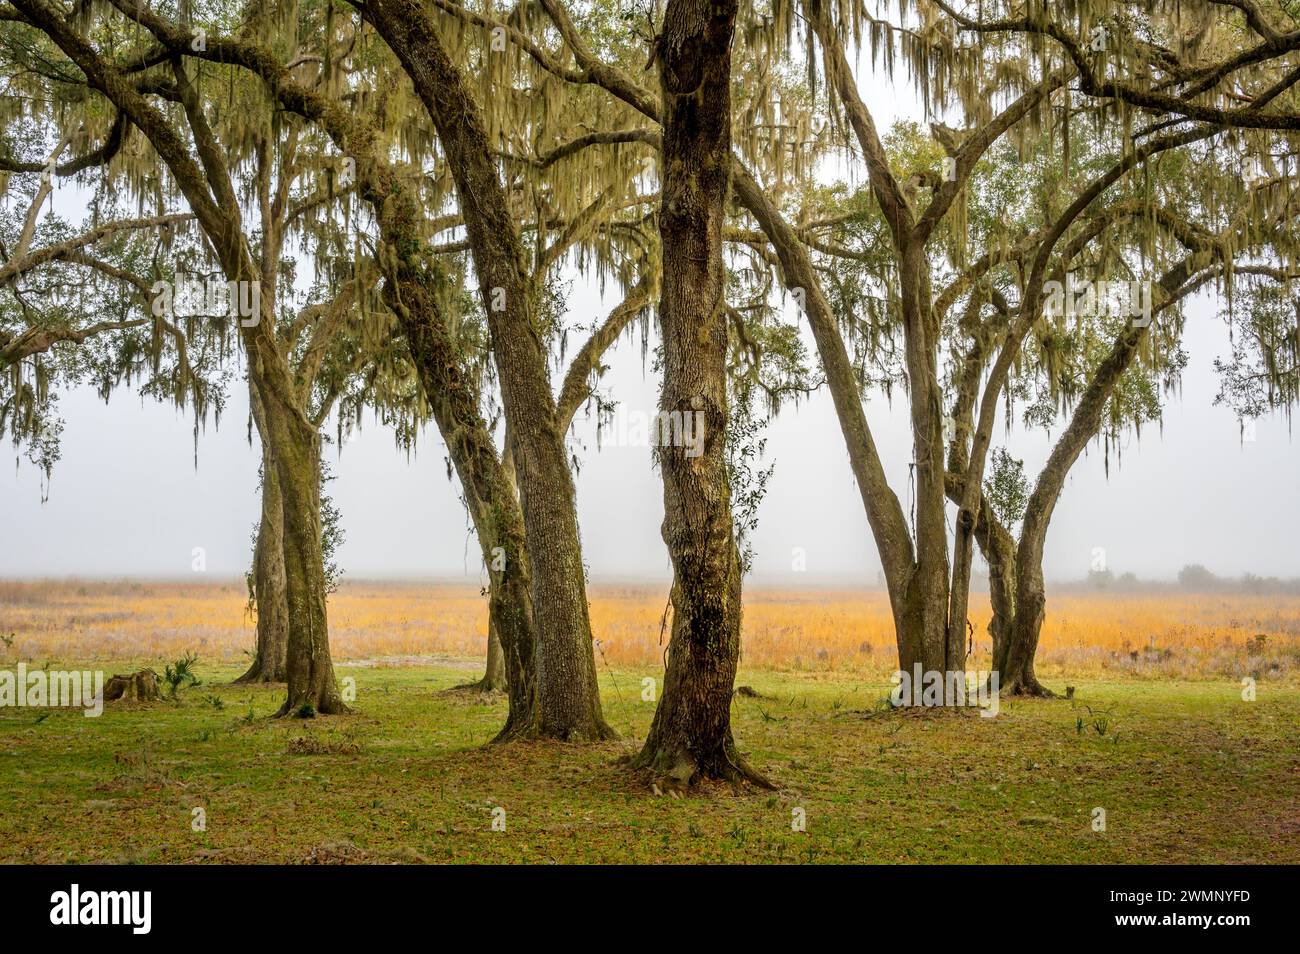 Spanish moss covered trees in Paynes Prairie Preserve State Park, Florida, USA. Stock Photo